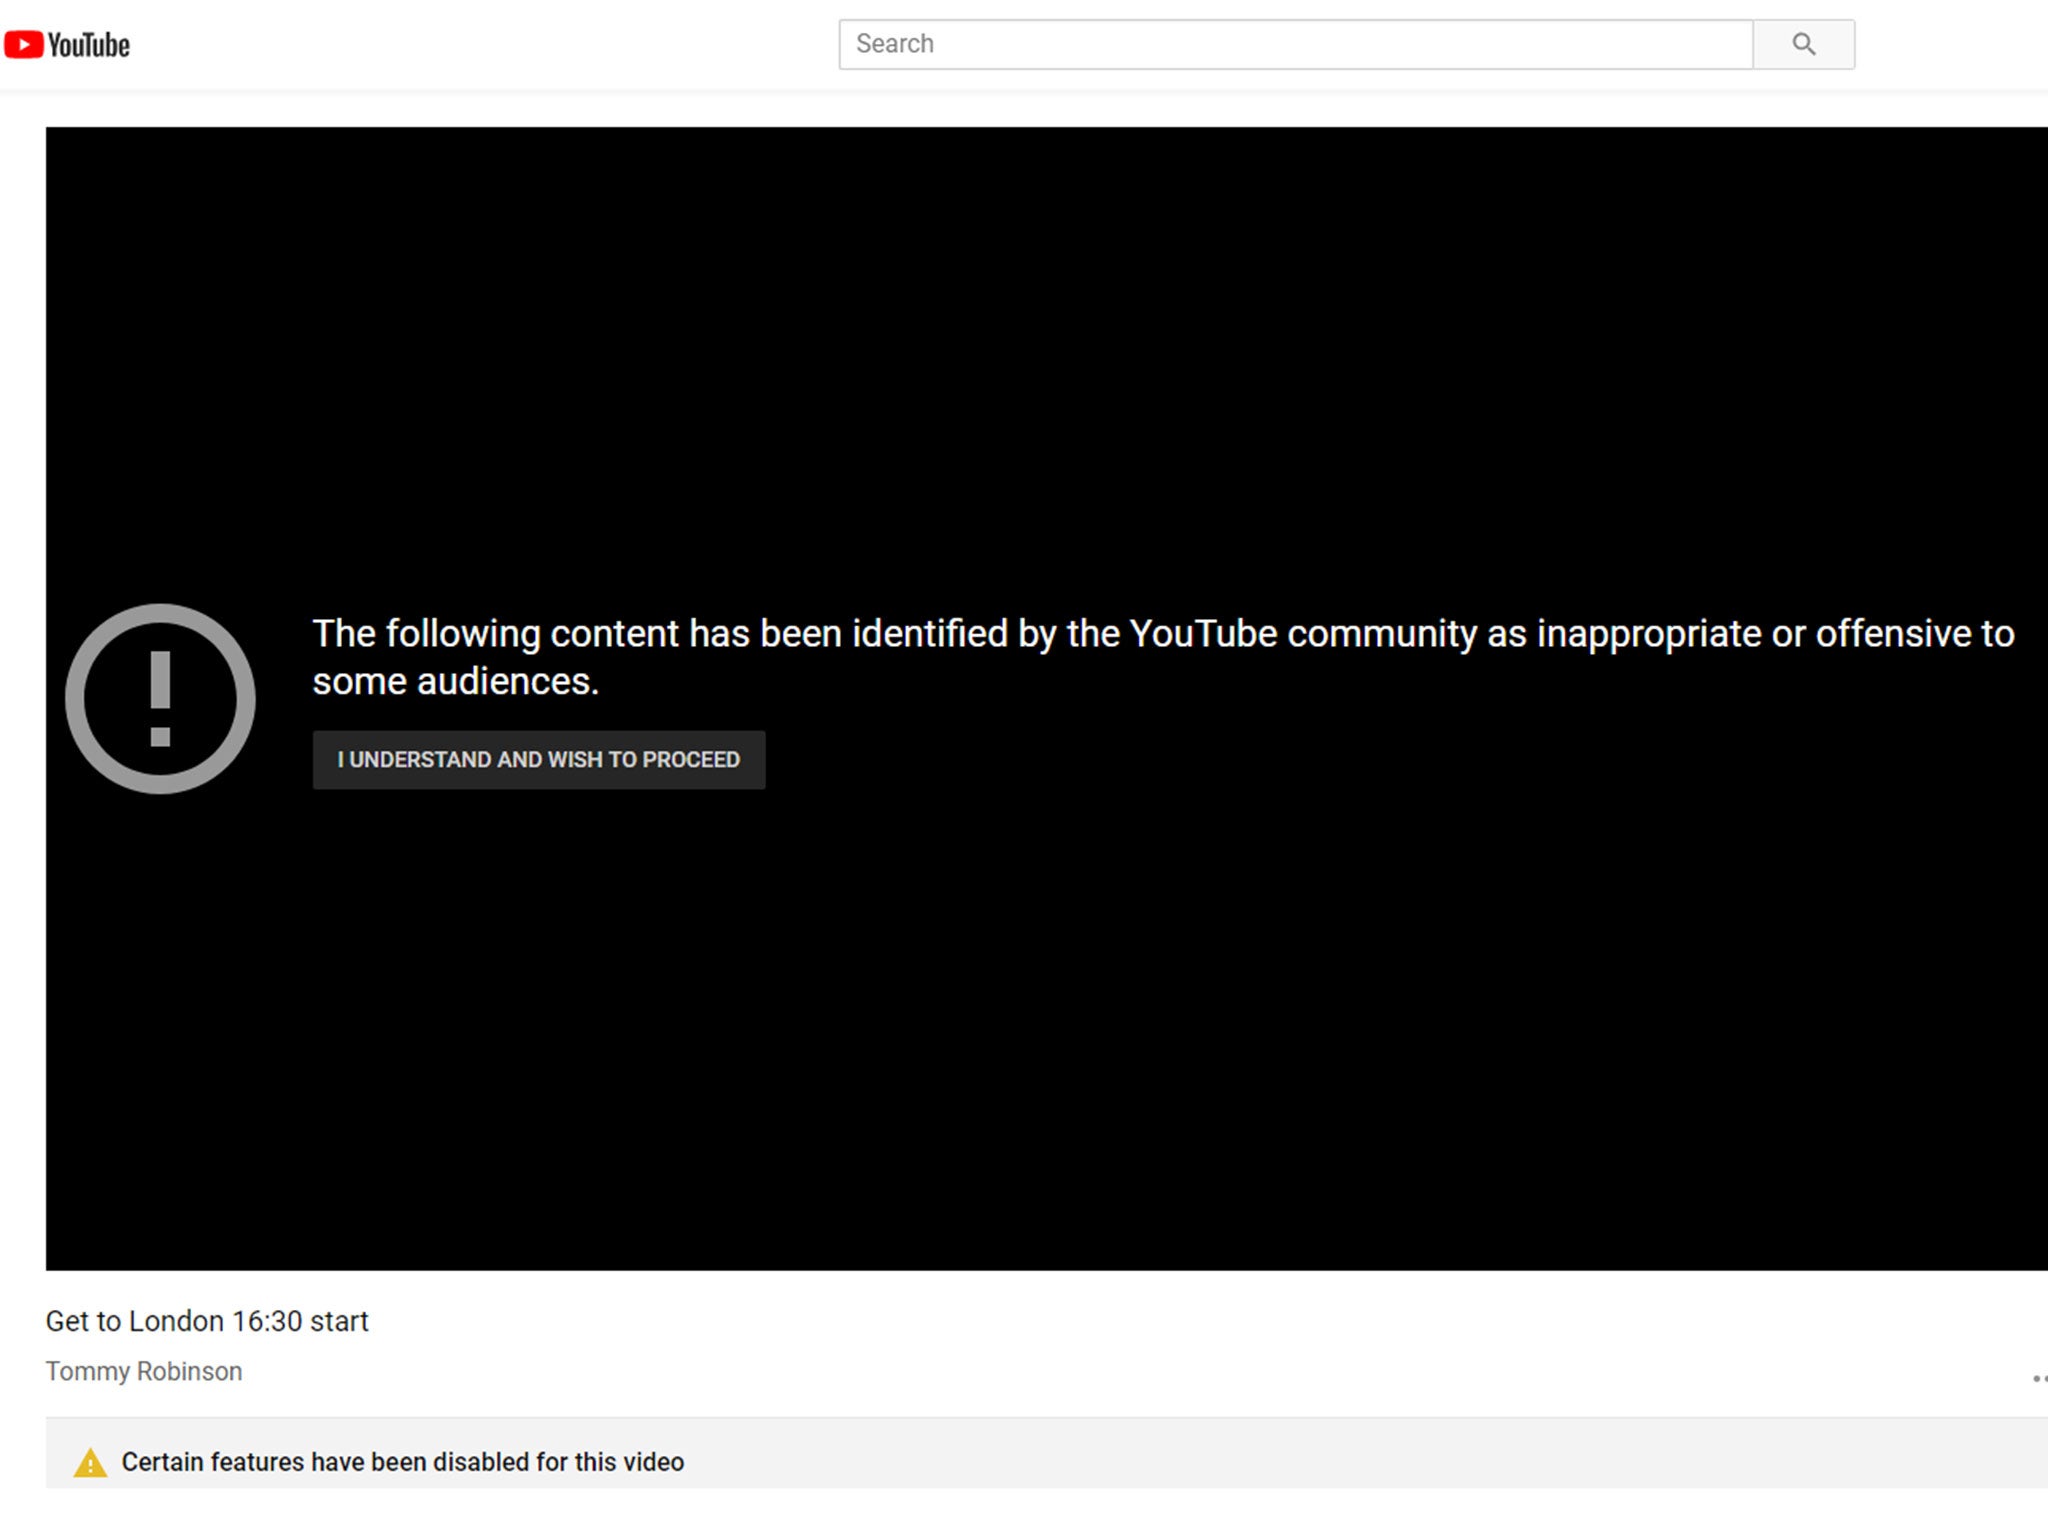 A warning now appears on YouTube videos on Tommy Robinson’s personal channel